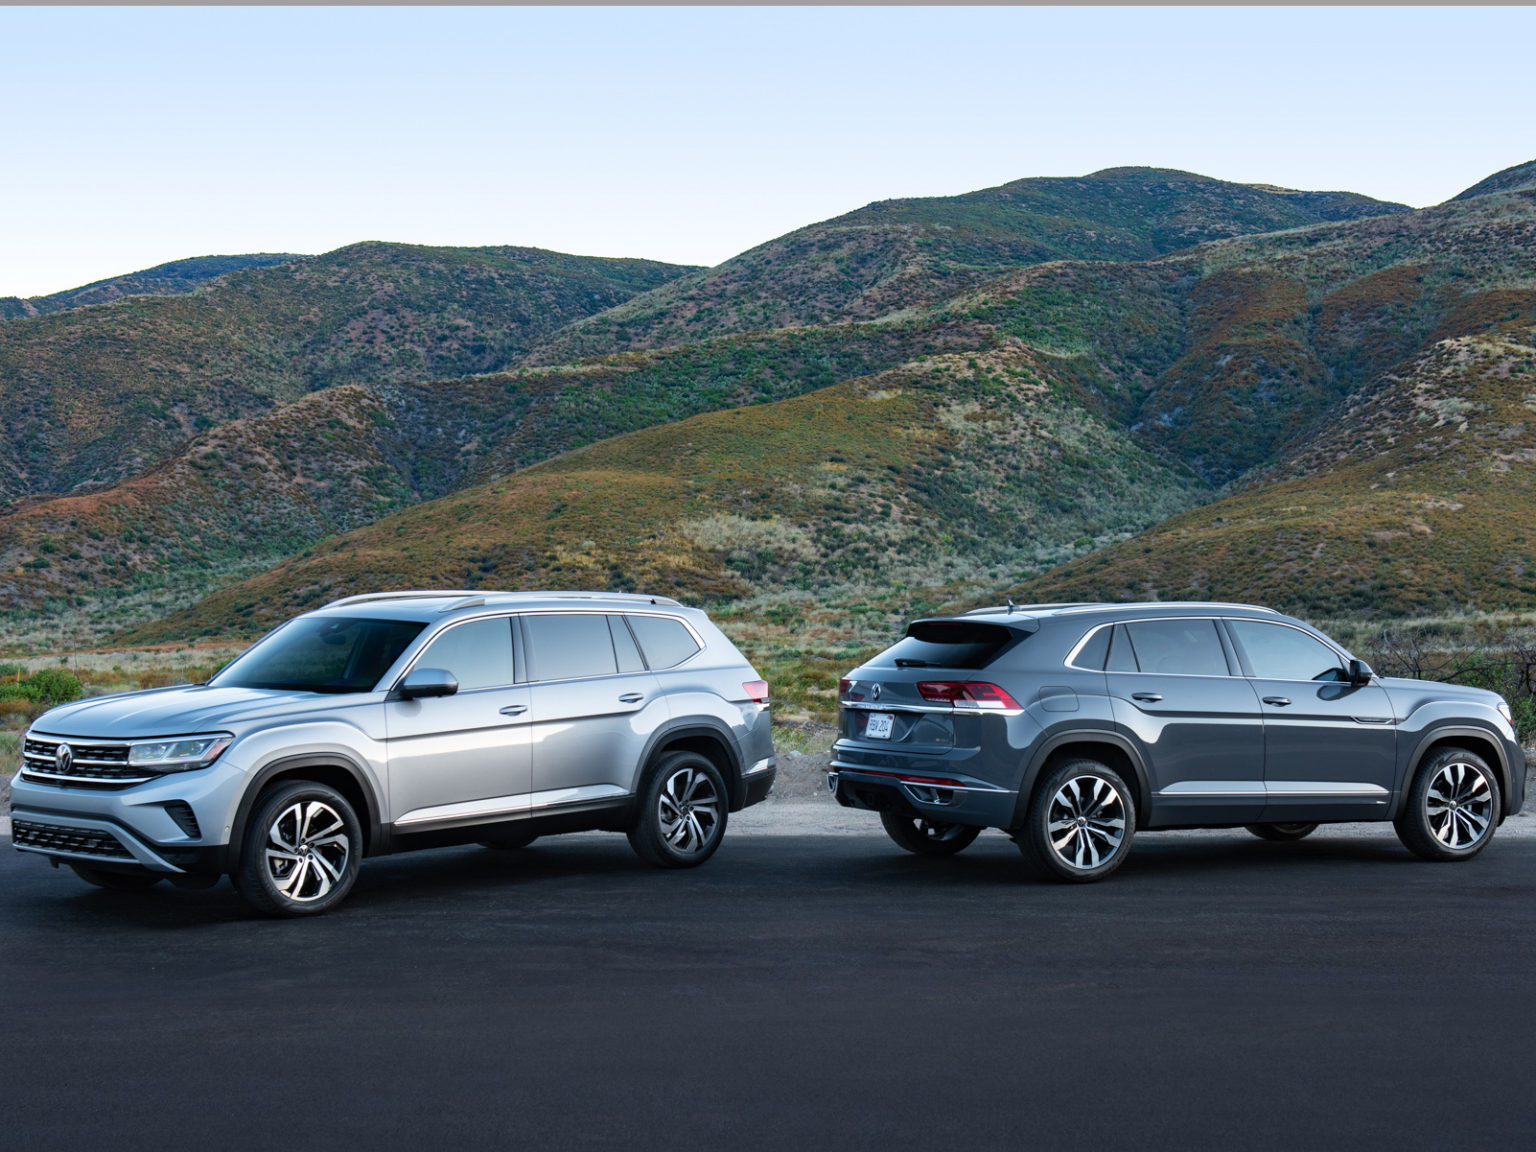 The Atlas Cross Sport and Atlas are two of the three SUVs Volkswagen is selling now in the U.S.